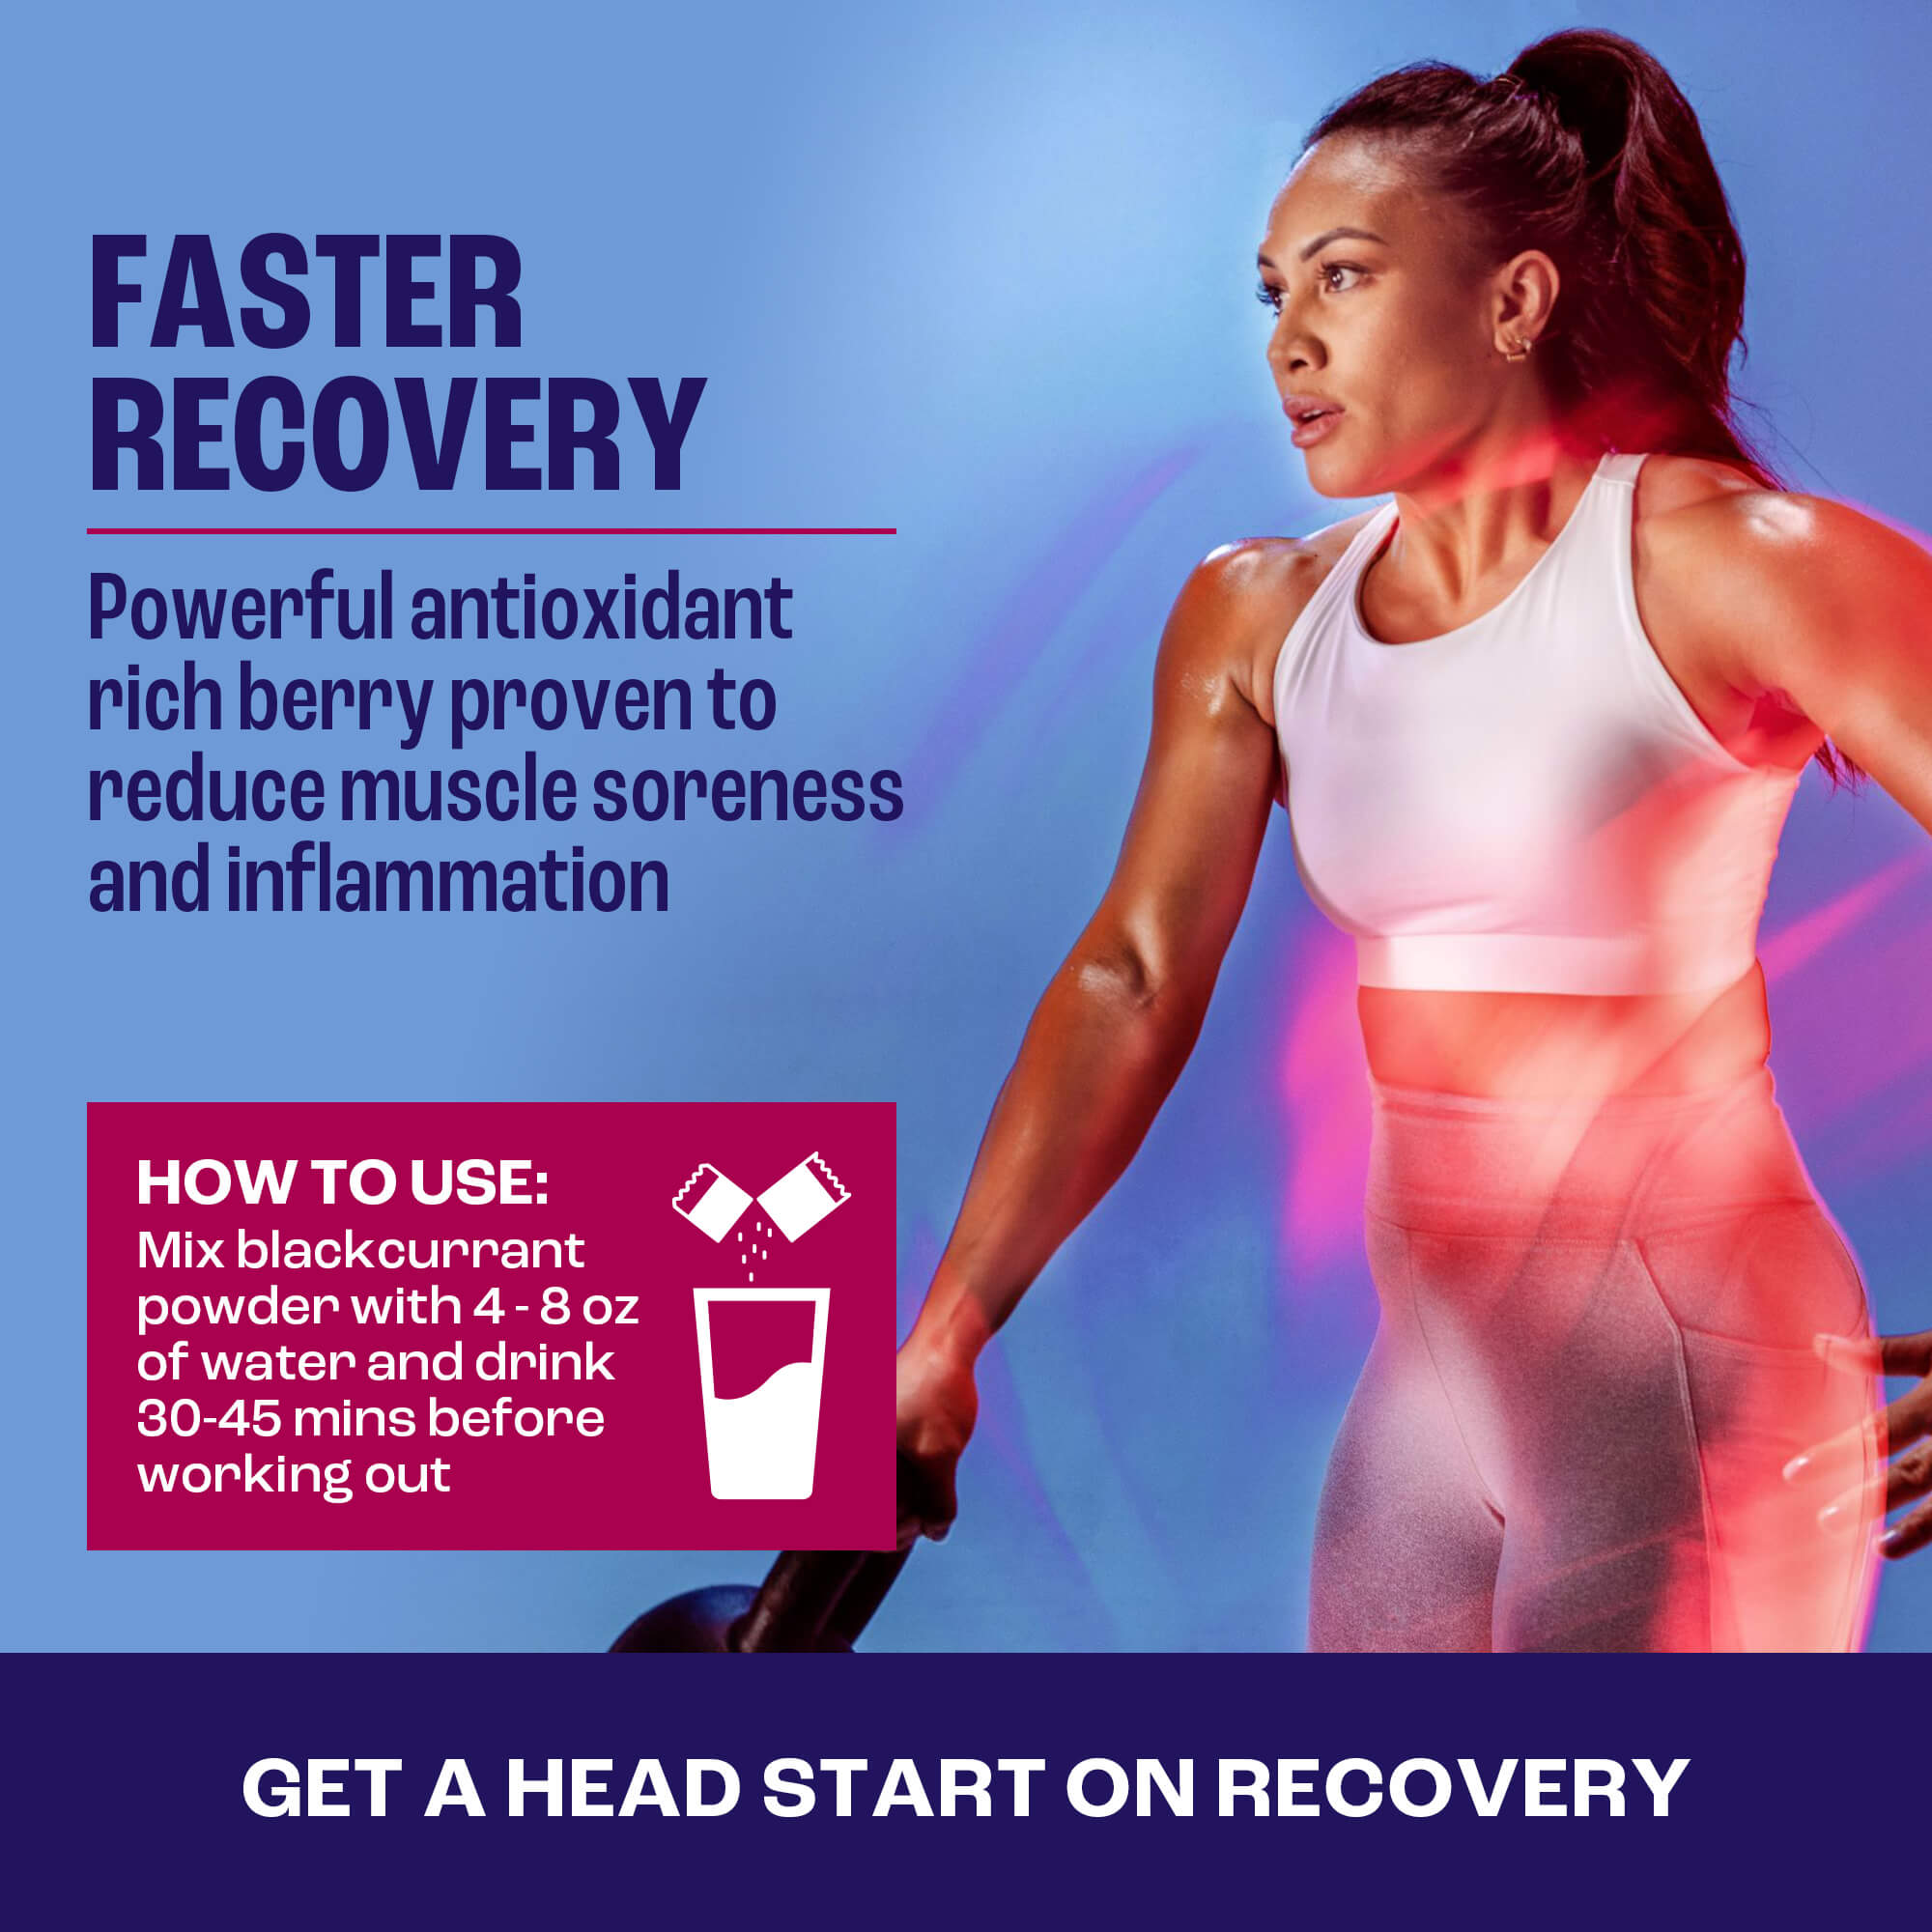 Faster recovery with 2before blackcurrant powder pre-workout